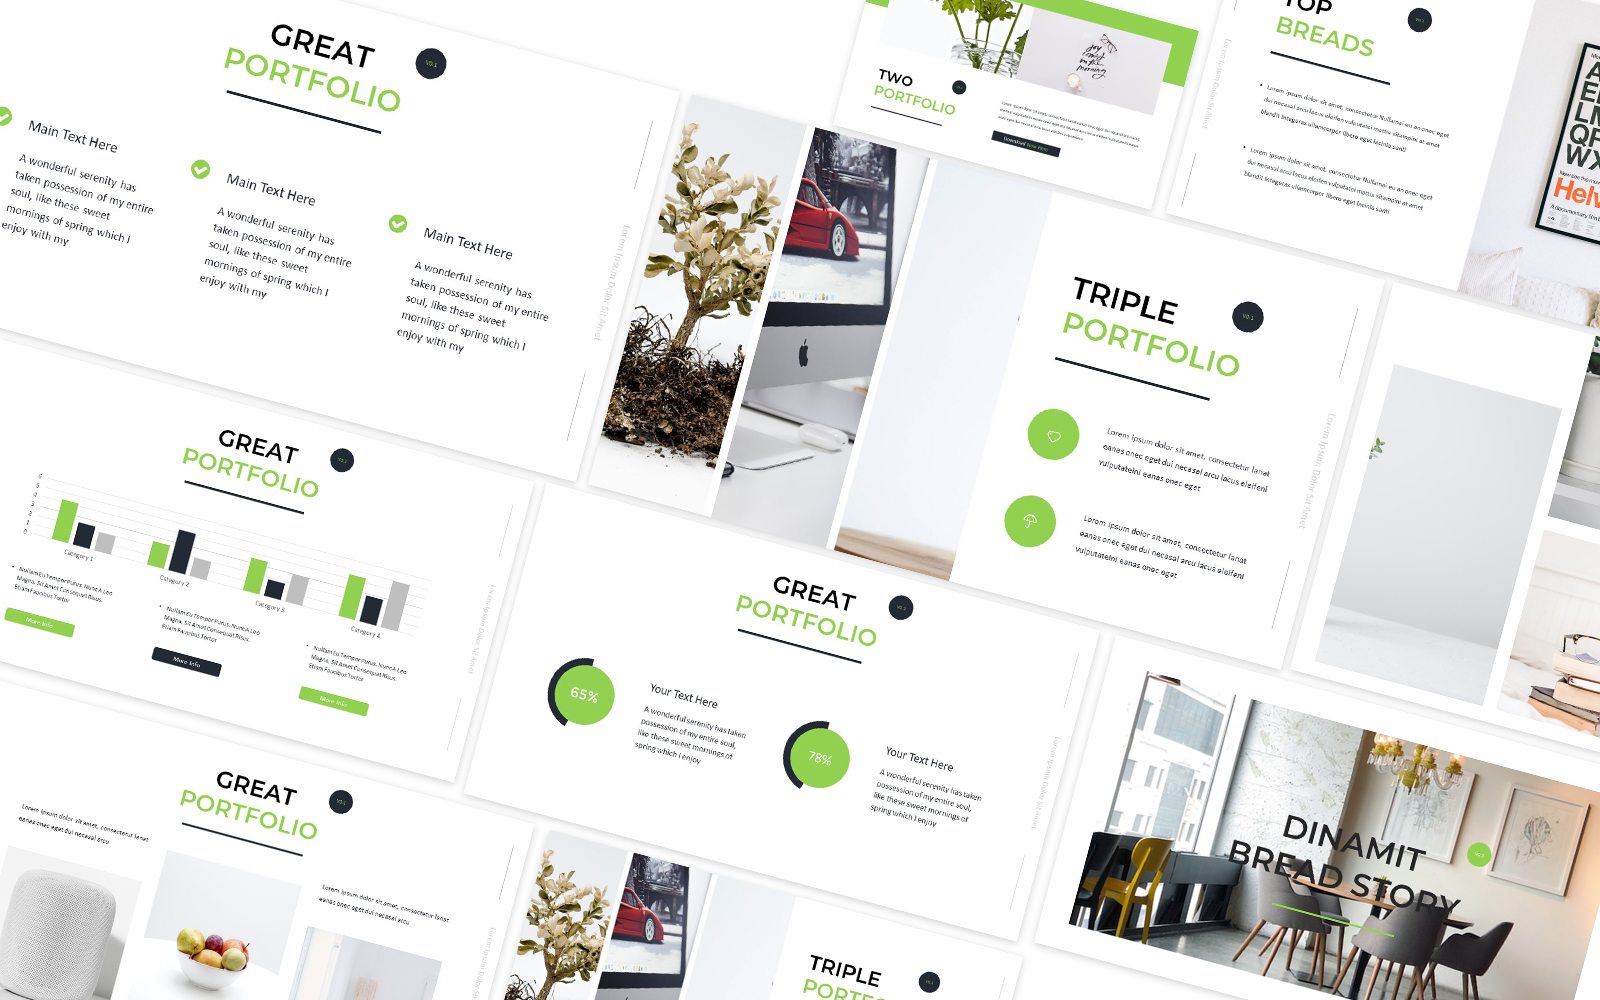 Dinamit Bread Story Powerpoint Template